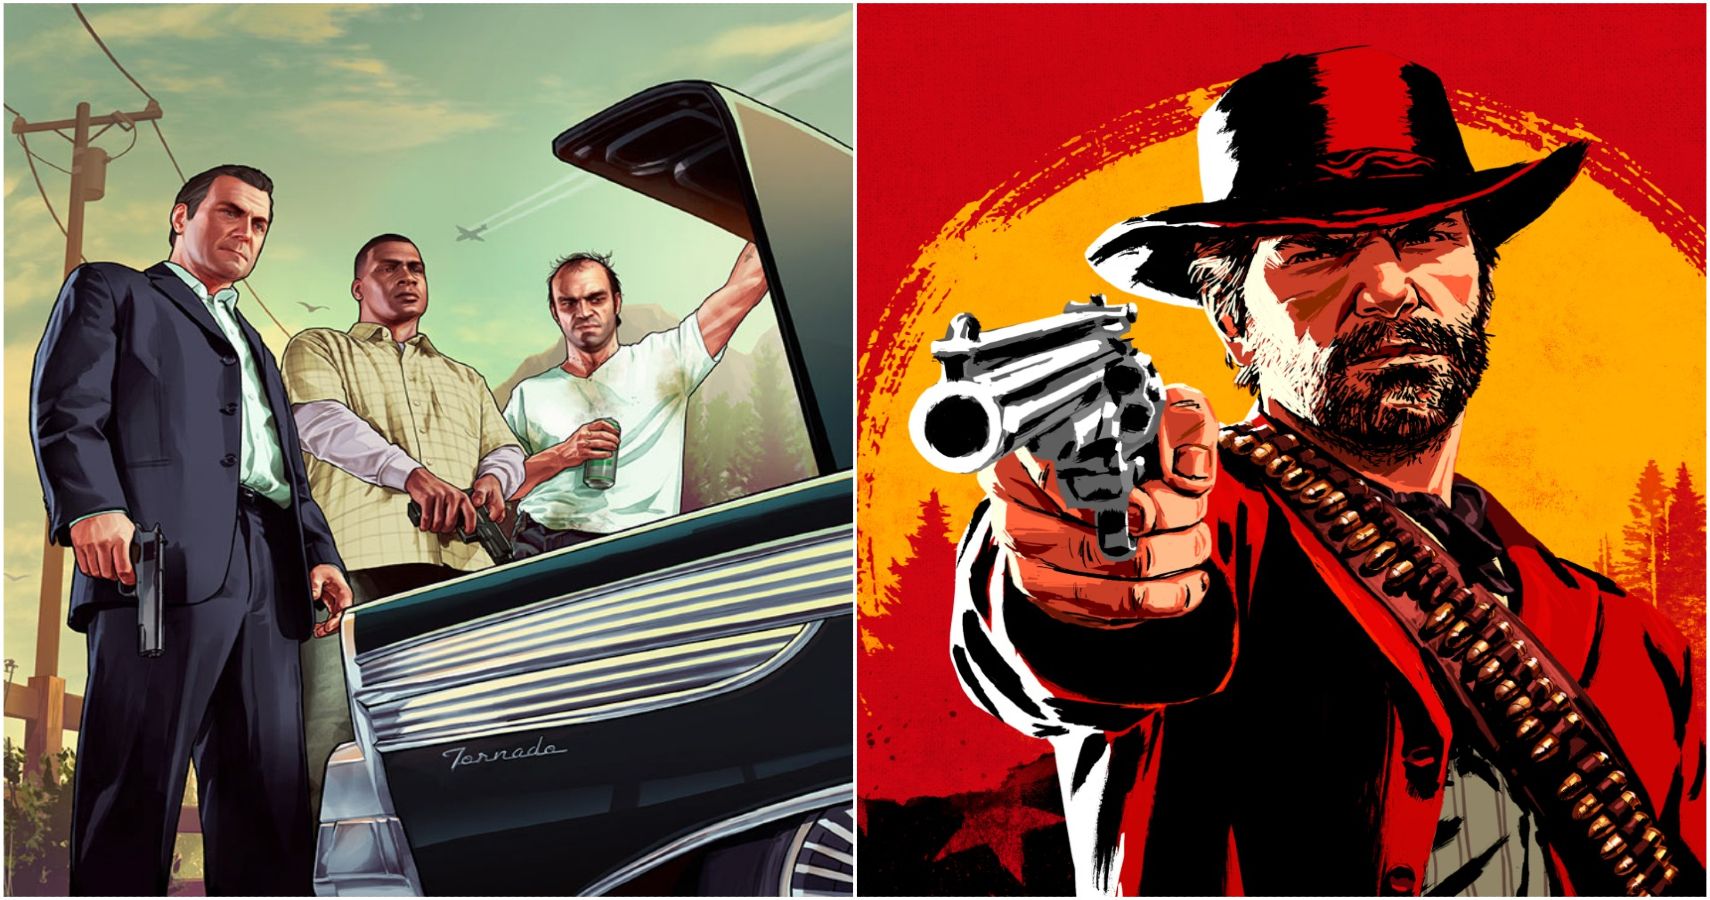 10 Grand Theft Auto Vs Red Dead Redemption Memes That Are Absolutely Hilarious